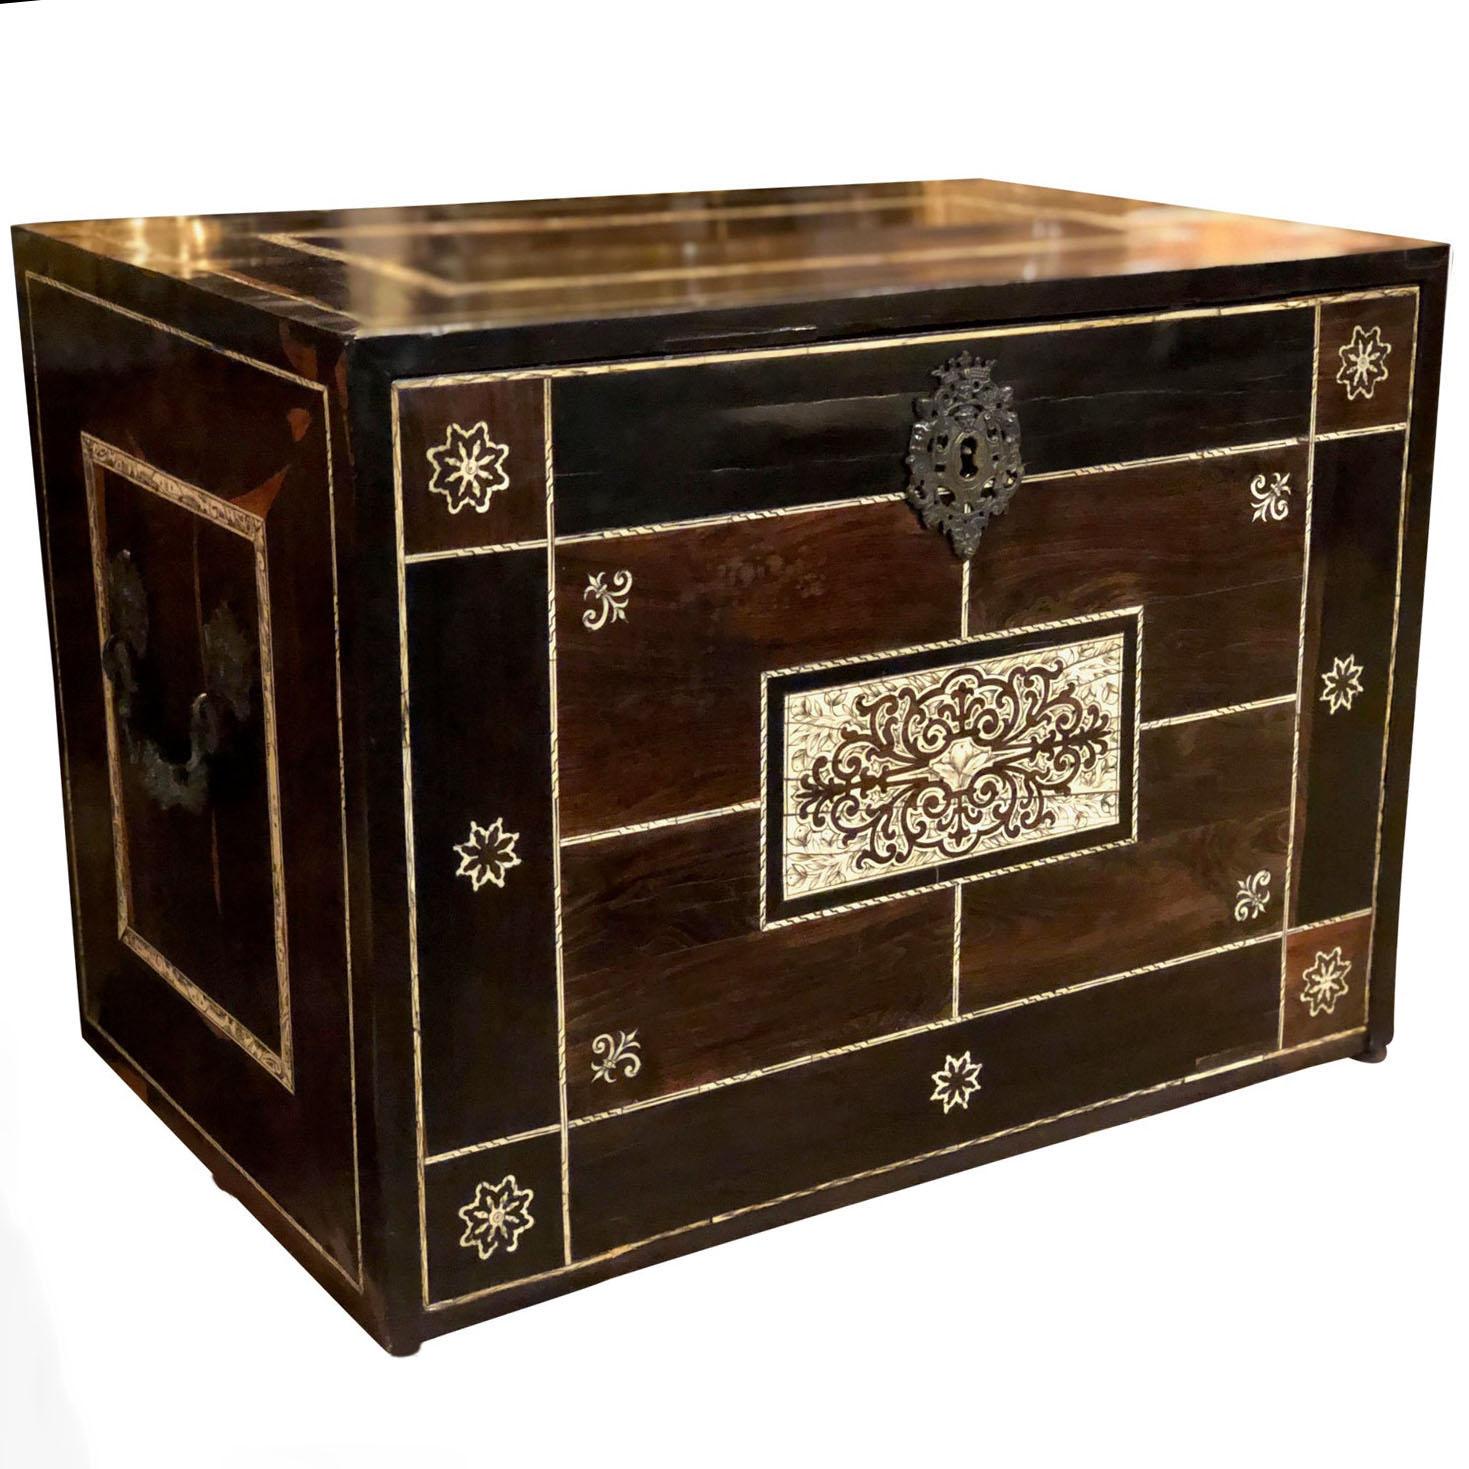 A 17th century silver mounted Coromandel wood with mother of pearl inlay traveling box with a Interior fitted with drawers and a reliquary cabinet. With key.